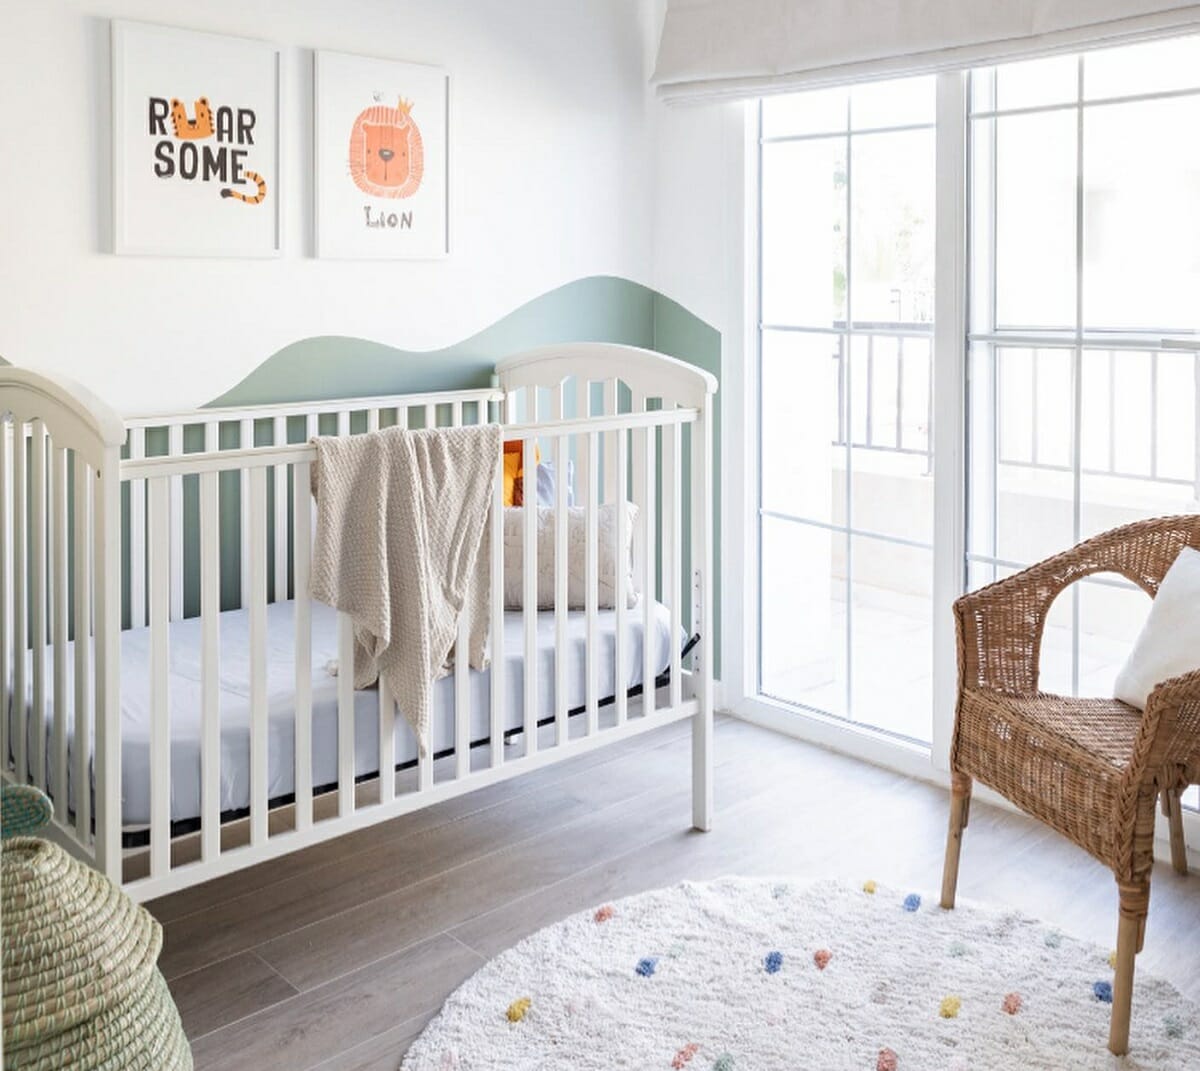 Nursery themes and designs